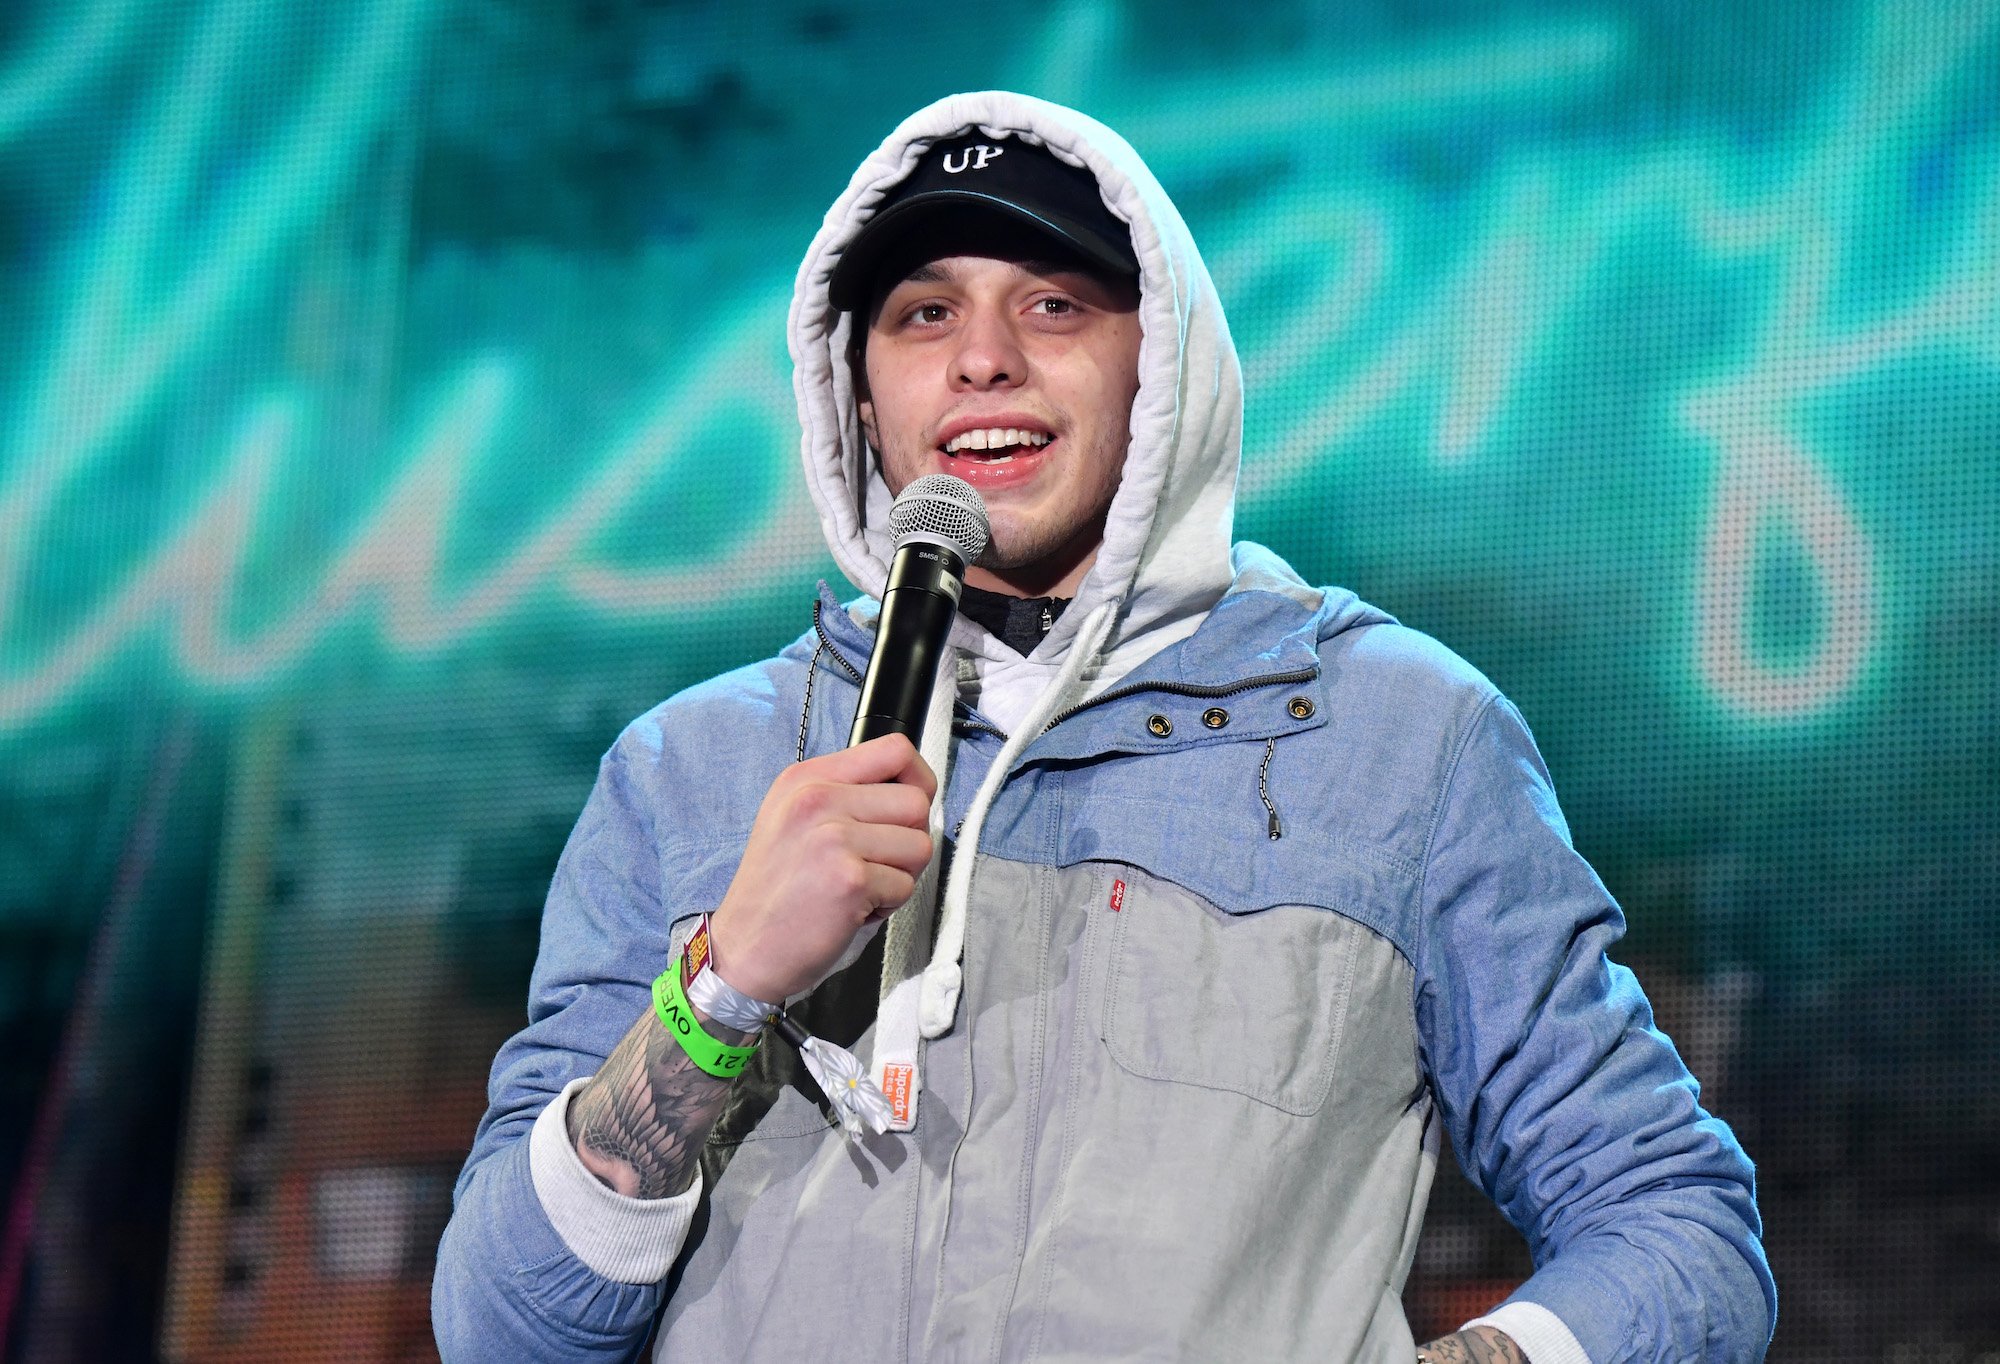 Pete Davidson performing stand up on stage, holding a microphone